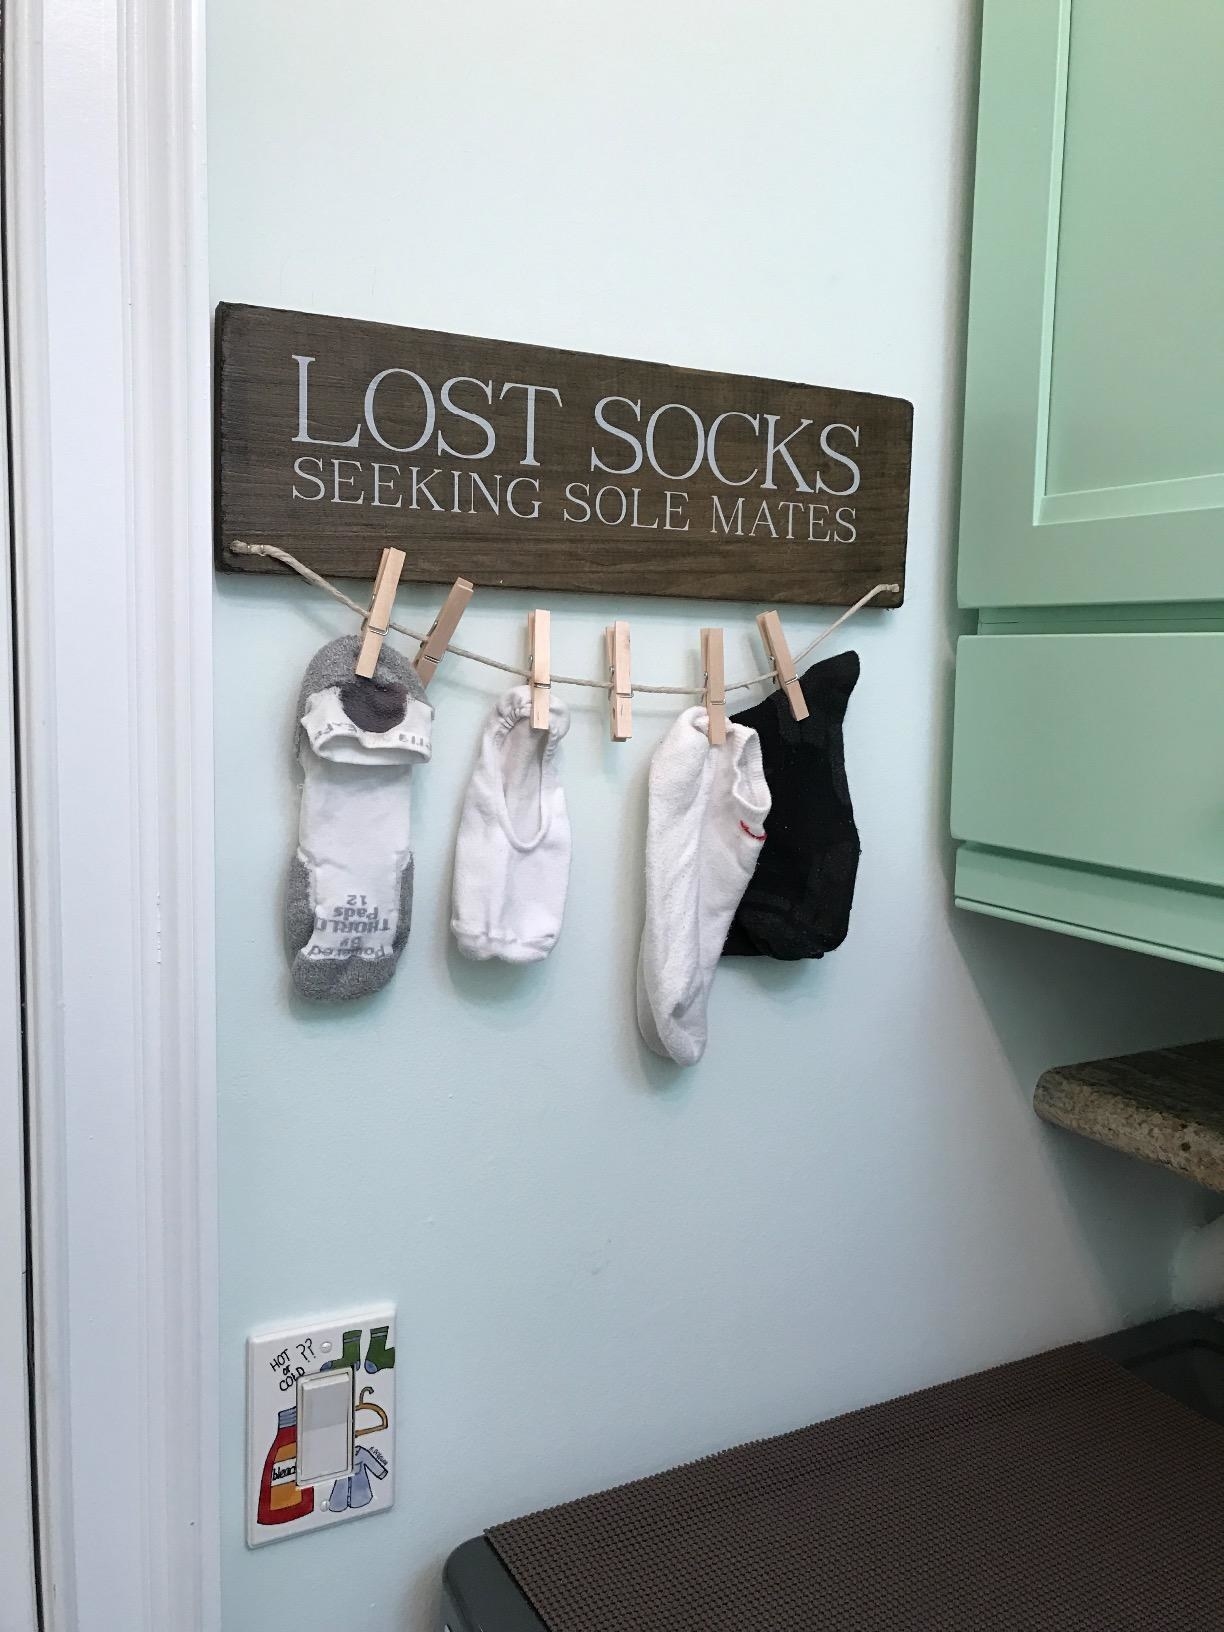 A reviewer showing the hanger with a sign that says &quot;Lost Socks seeking sole mates&quot; with four socks hanging on it